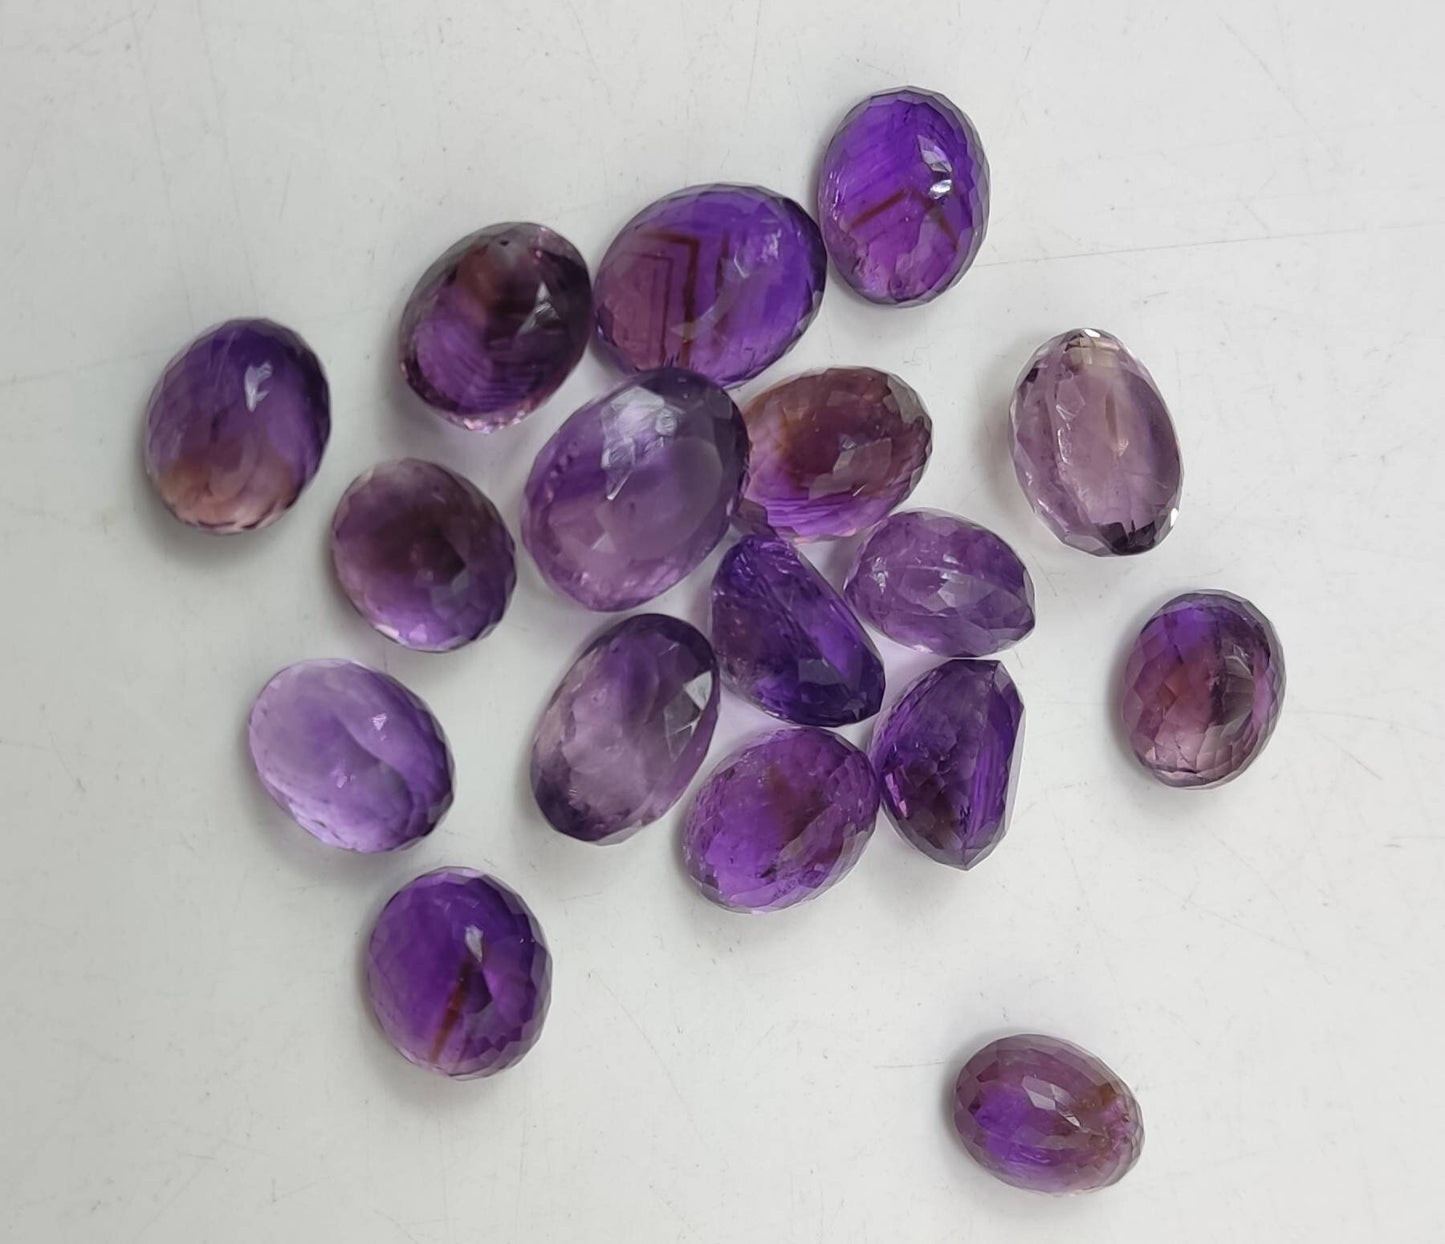 An amazing lot of faceted Amethyst gemstones 17 pieces 186 carats weight